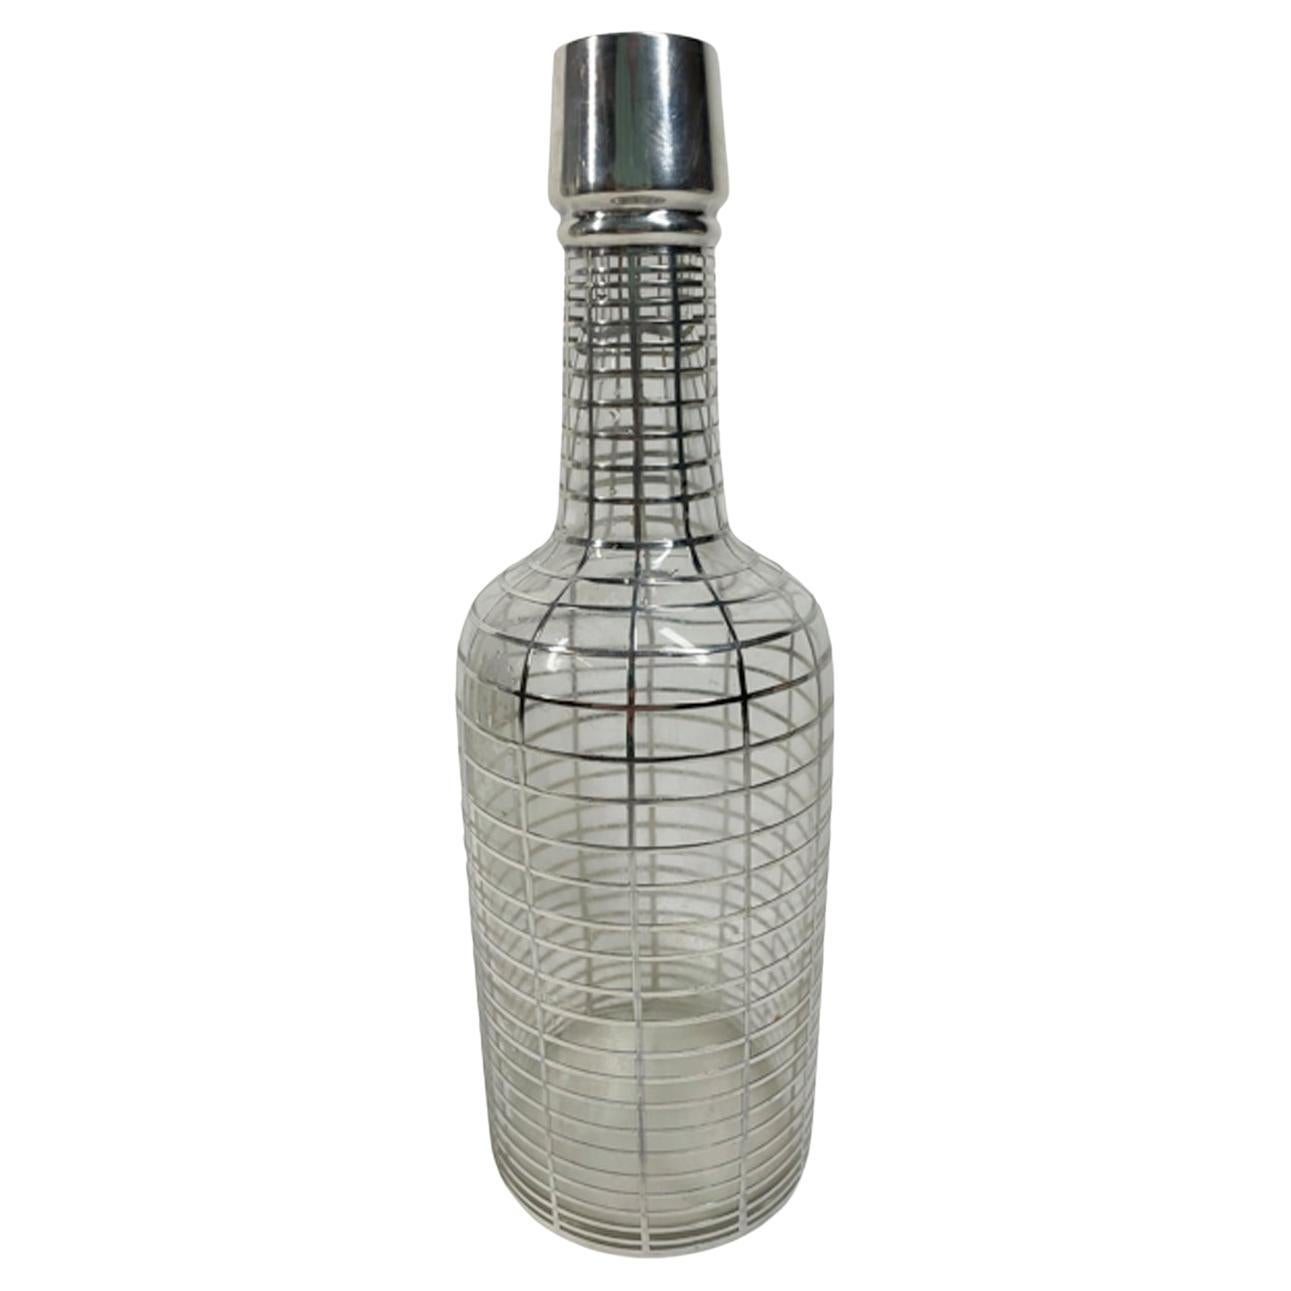 Early 20th century silver overlay clear glass back bar bottle with narrow sterling rings spaced evenly from top to bottom with vertical lines connecting the rings. A rectangular panel just below the shoulder is engraved with a script 